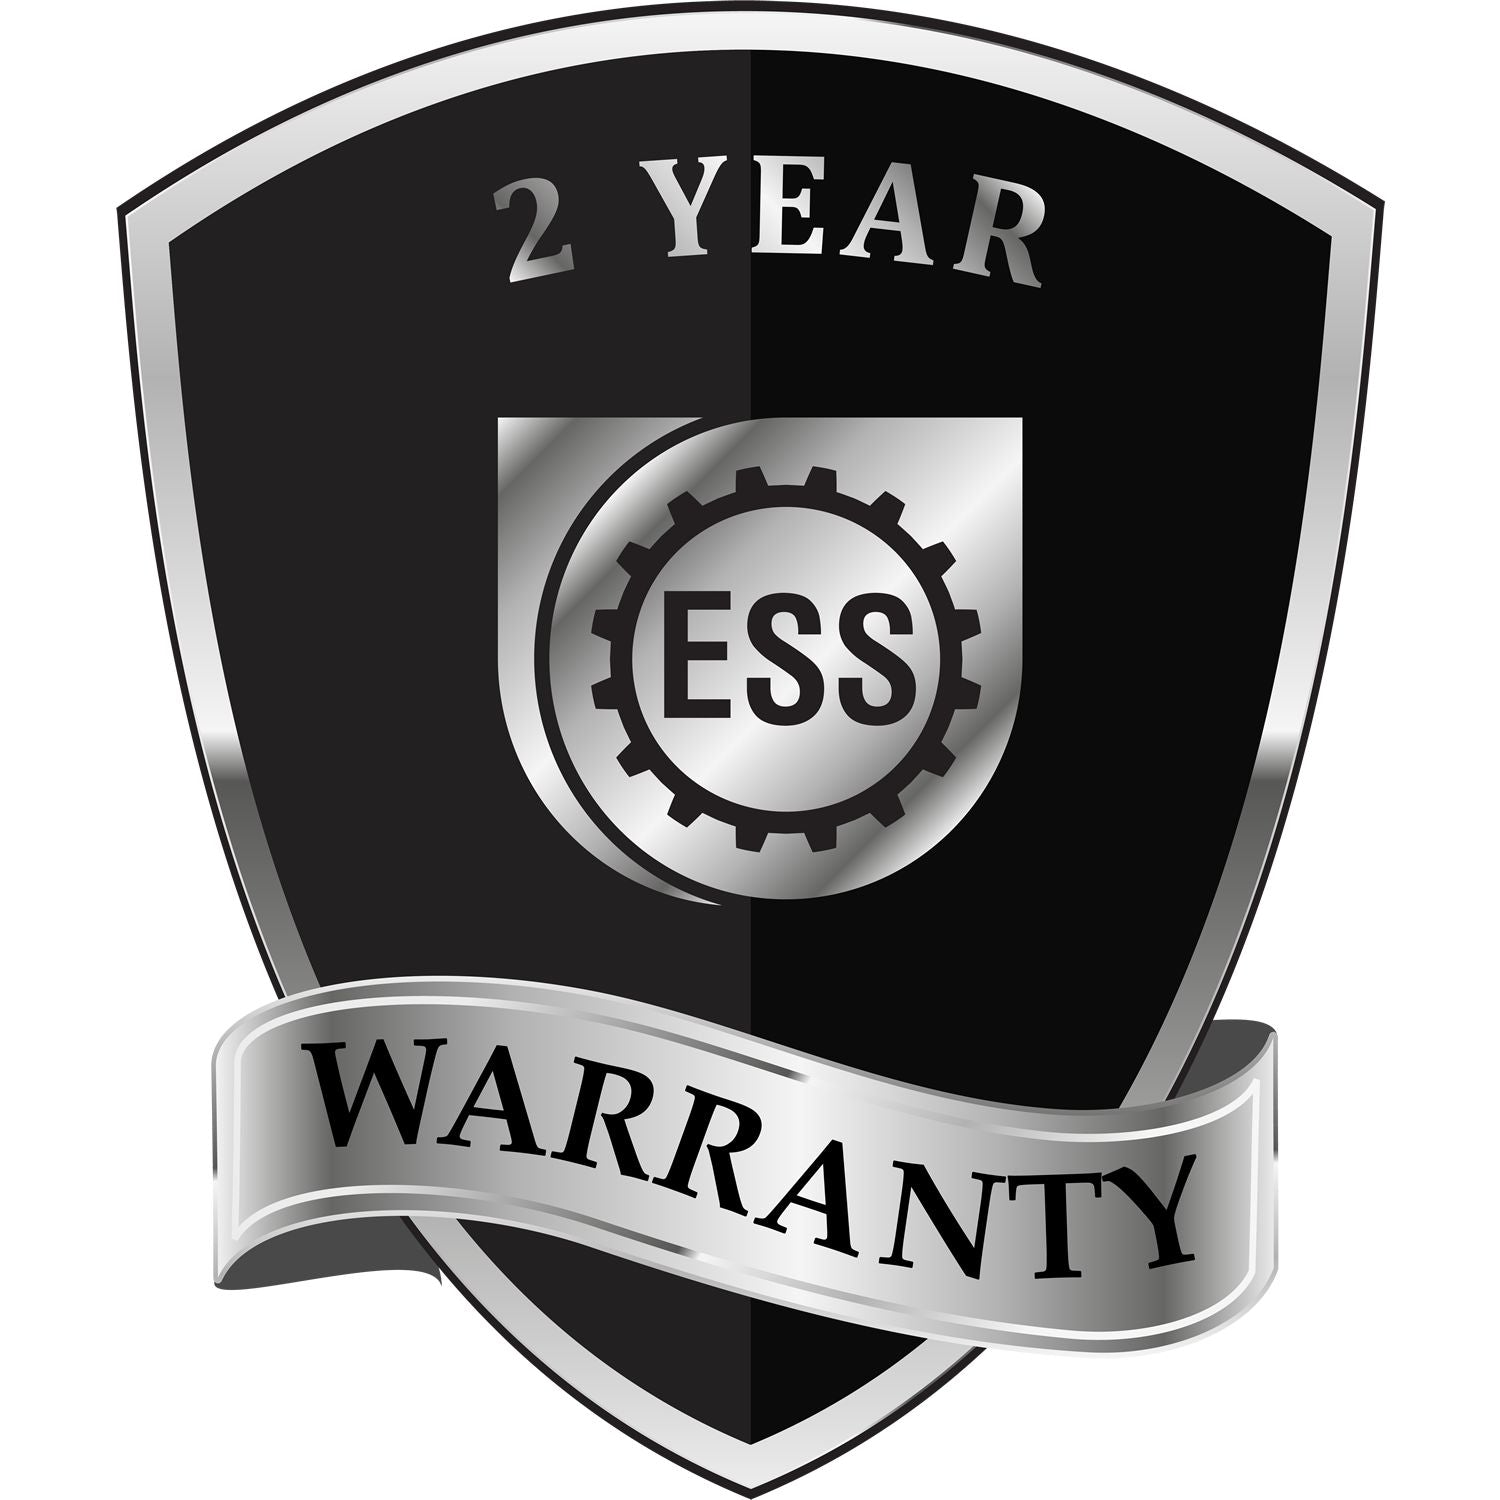 A badge or emblem showing a warranty icon for the Heavy Duty Kentucky Landscape Architect Cast Iron Embosser